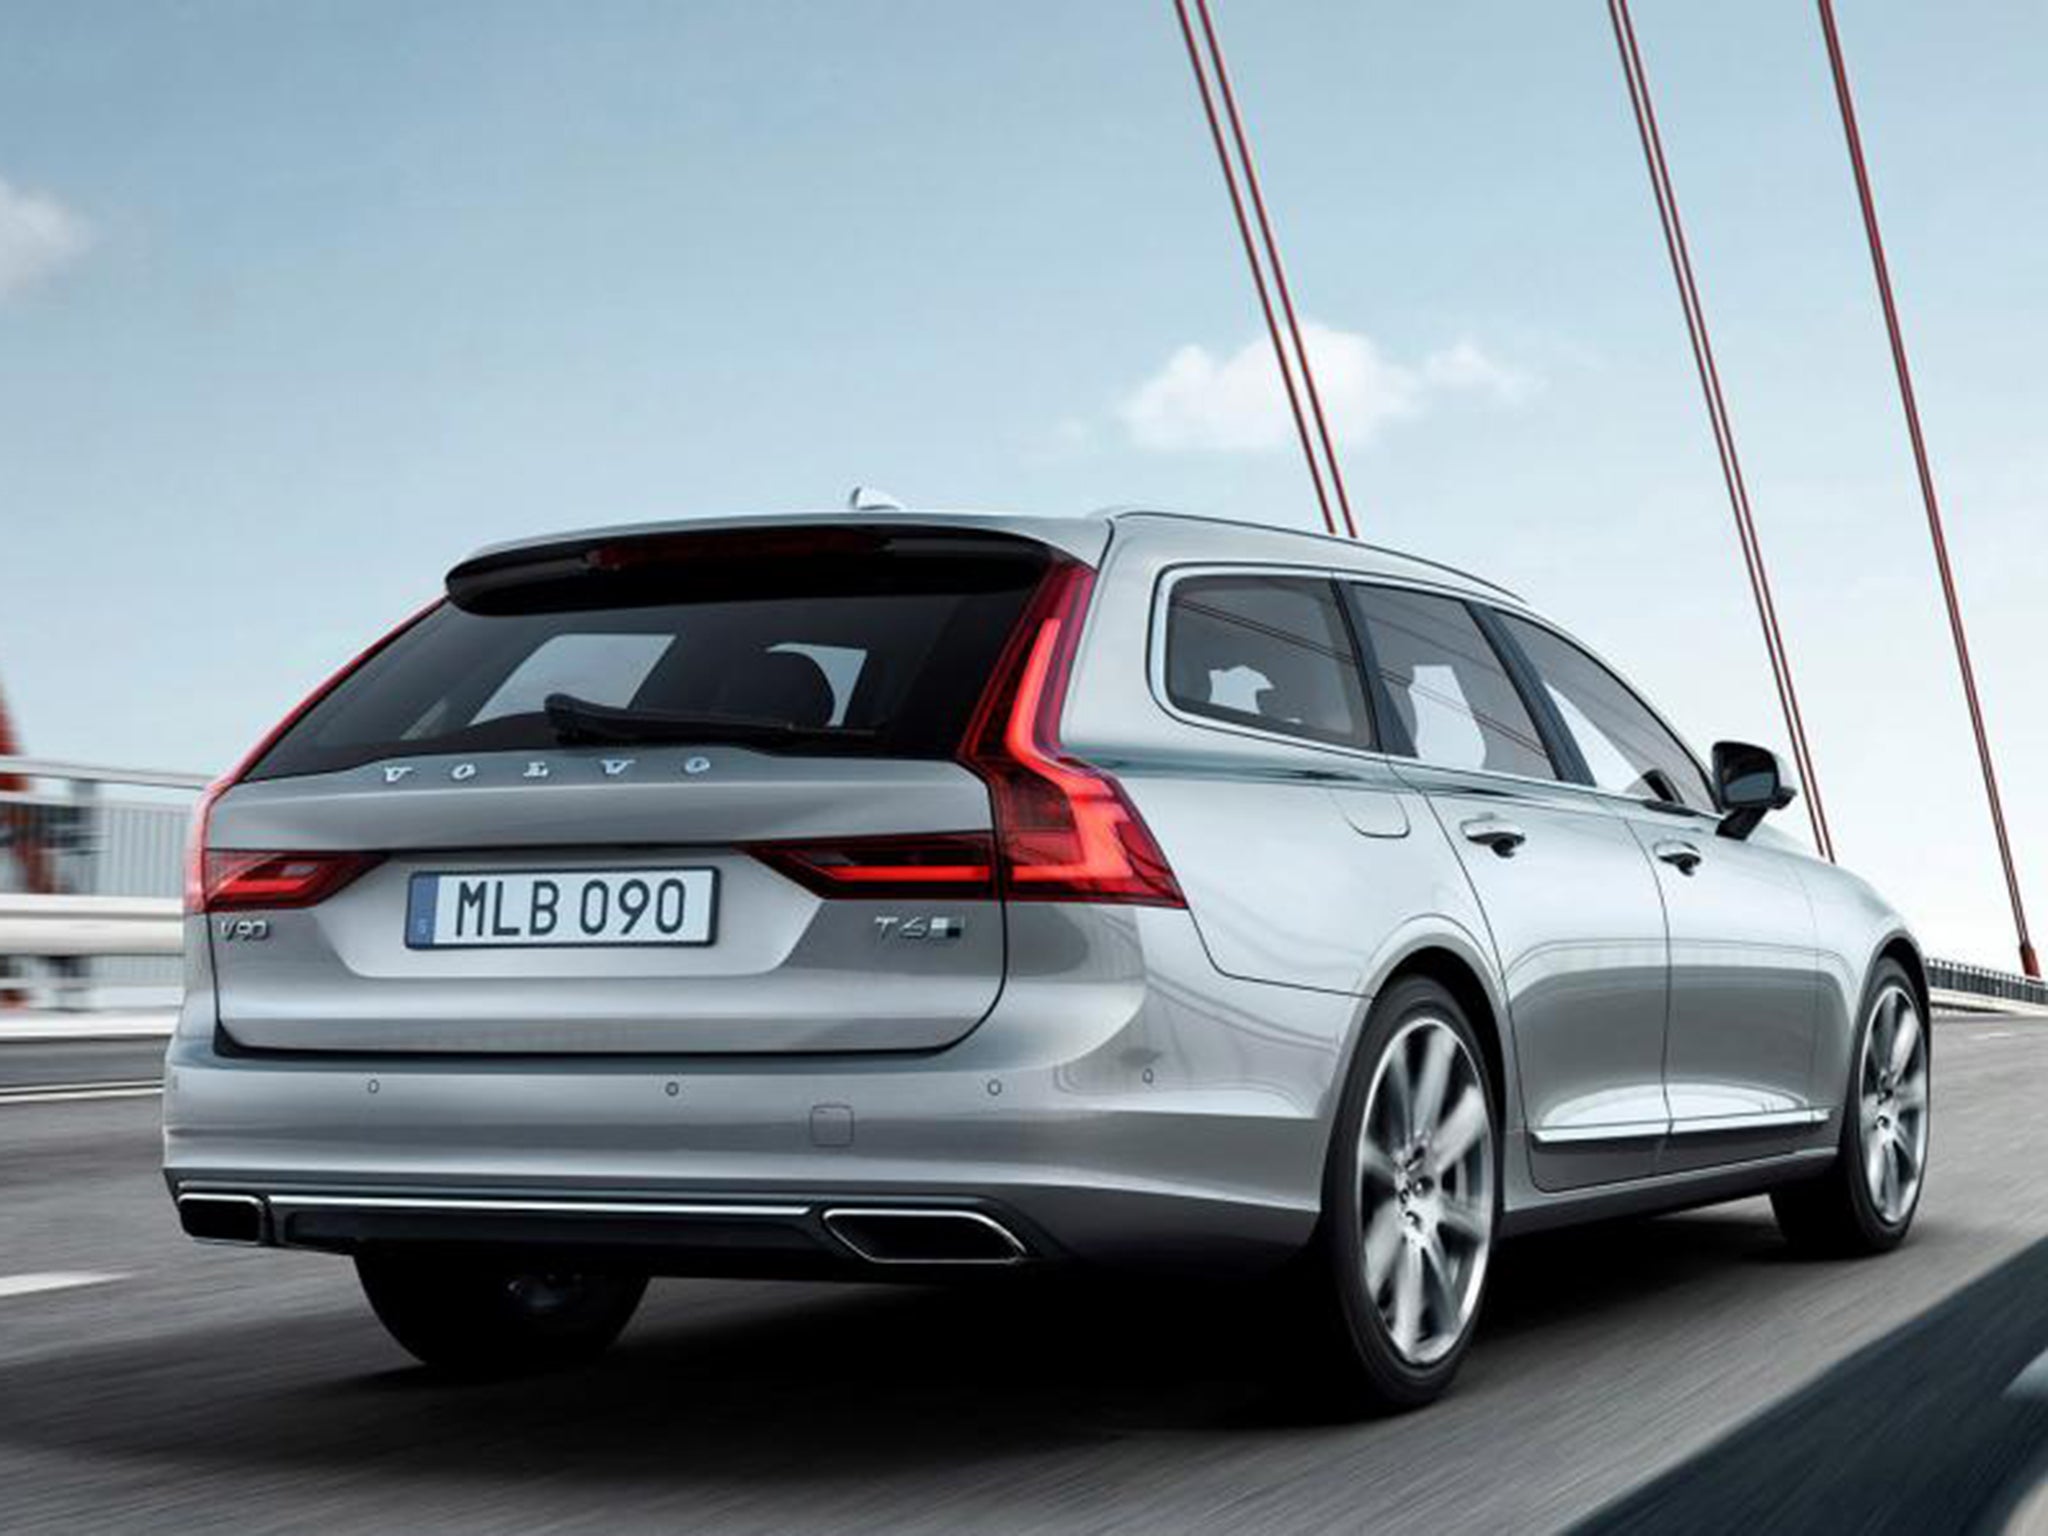 The Volvo V90 estate is slightly larger than the S90 saloon